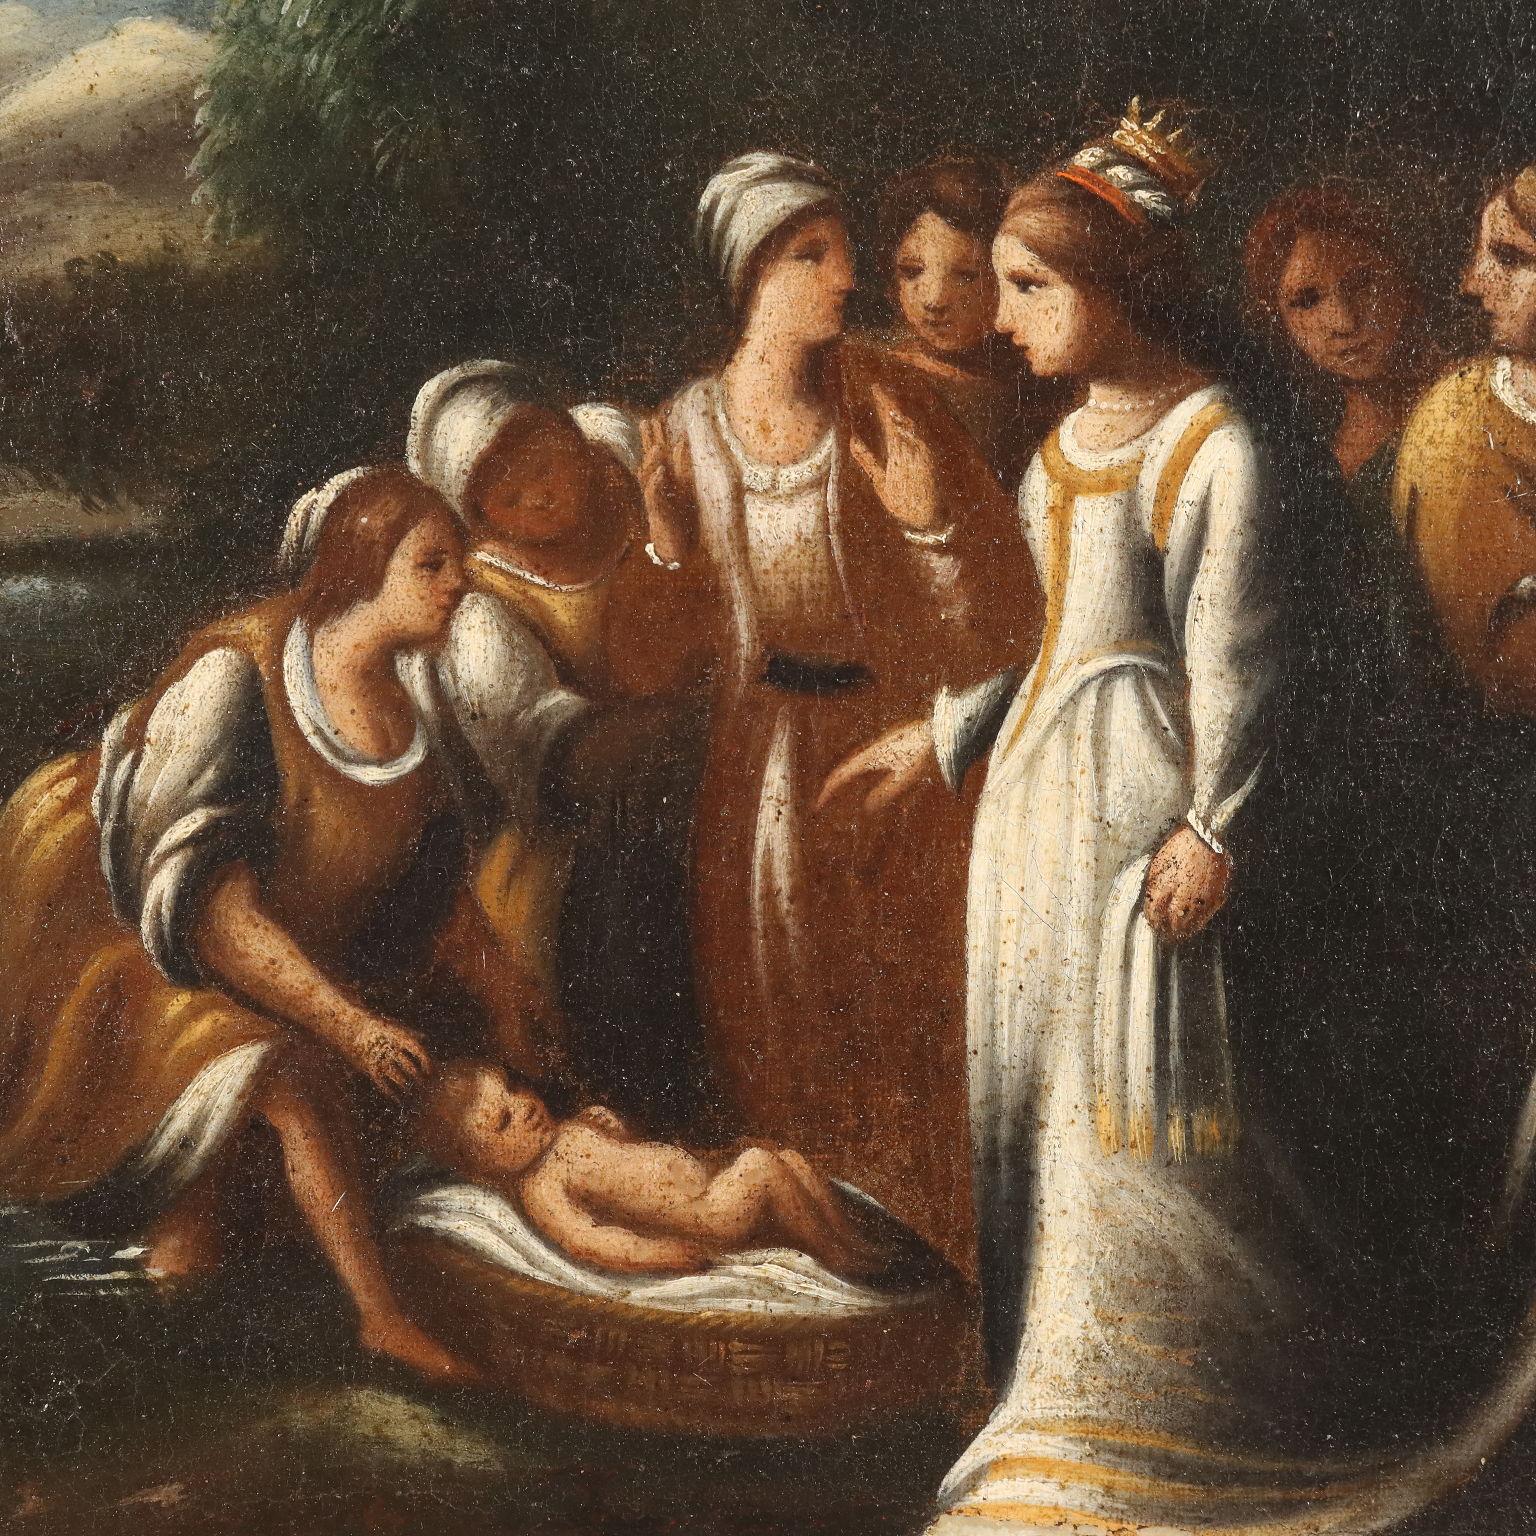 Unknown Figurative Painting - Painting Moses Saved by the Waters, 17th-18th century